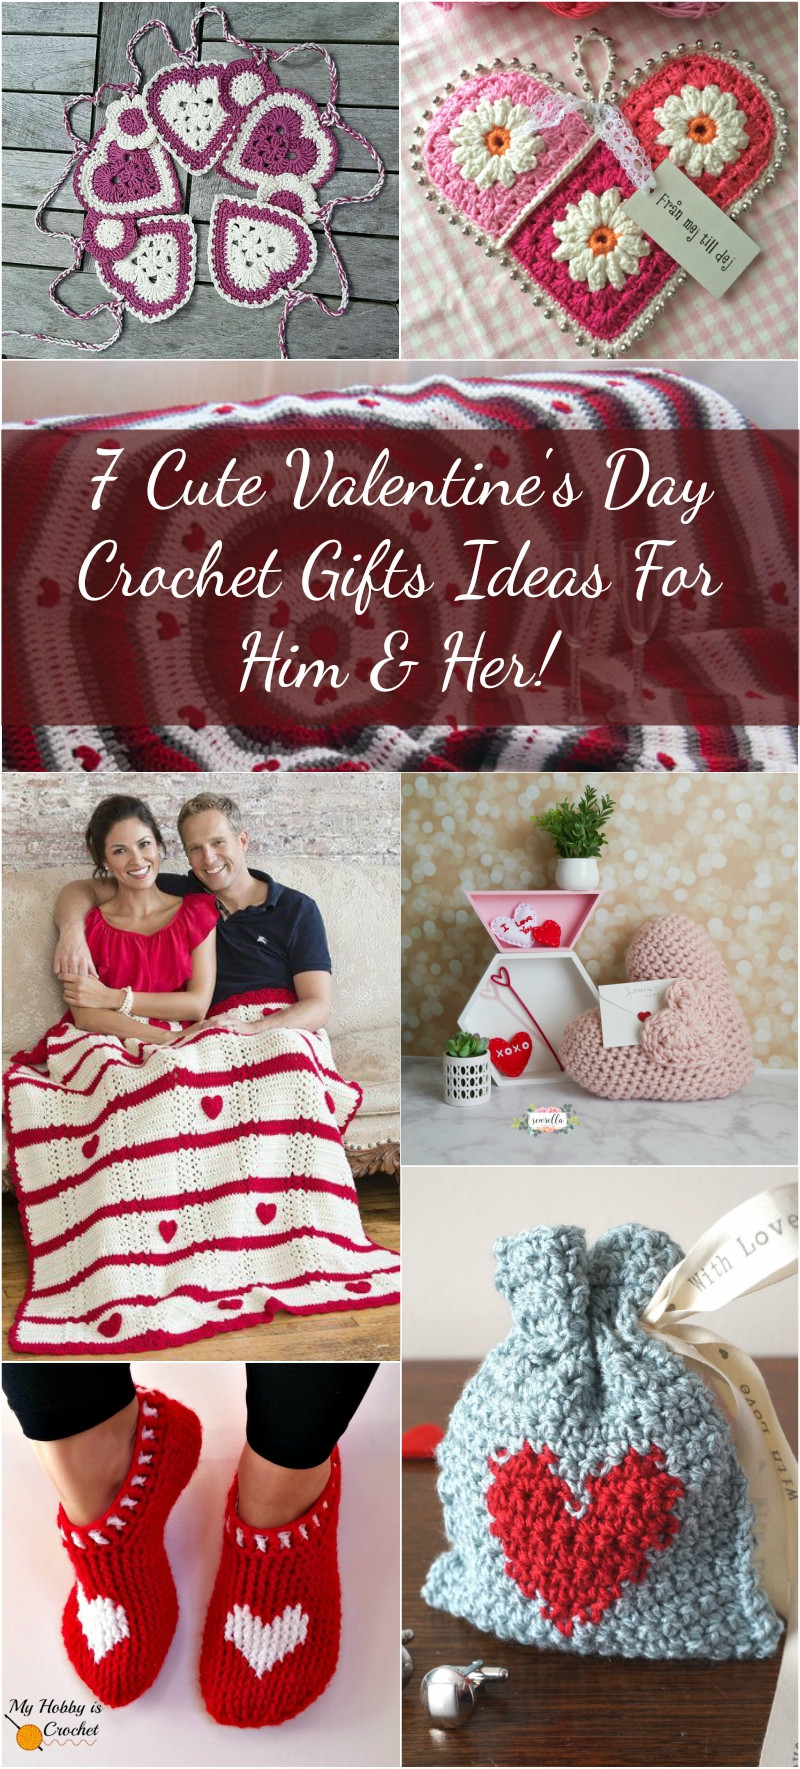 Valentines Gift Ideas For Her Pinterest
 7 Cute Valentine s Day Crochet Gifts Ideas For Him & Her